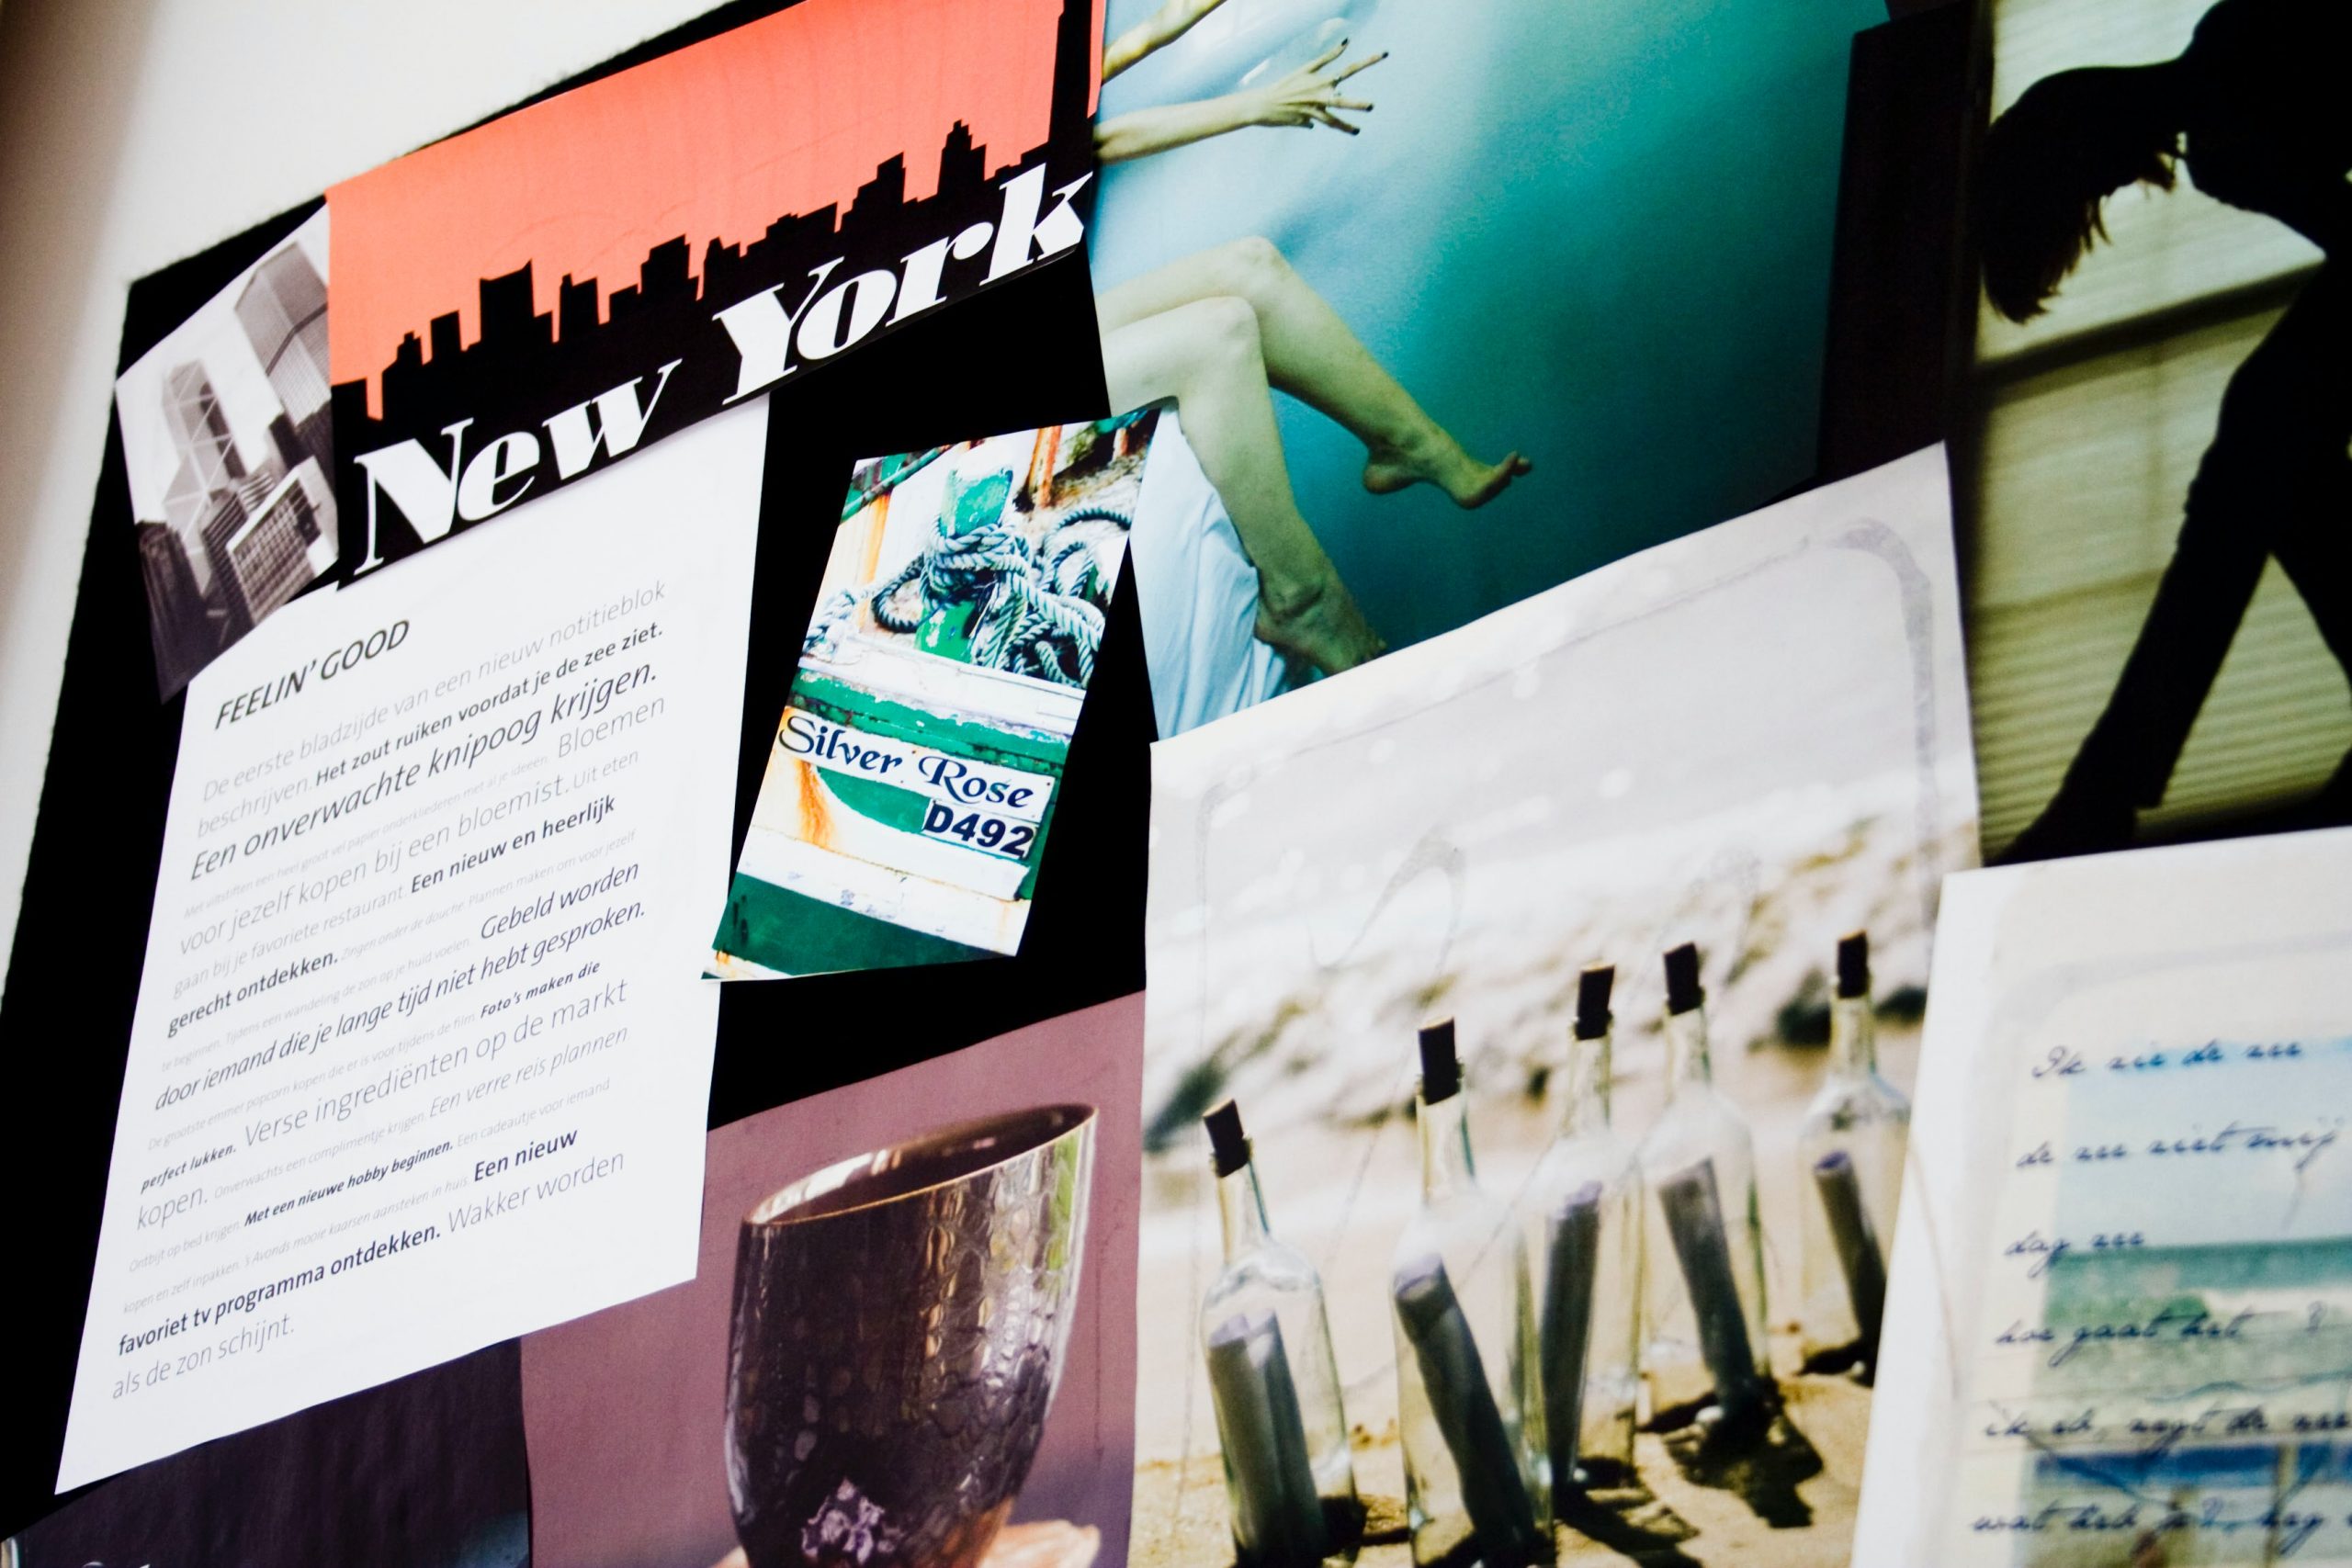 images of bottles on a beach, new york city skyline, coffee mug, and letter pinned to a cork board